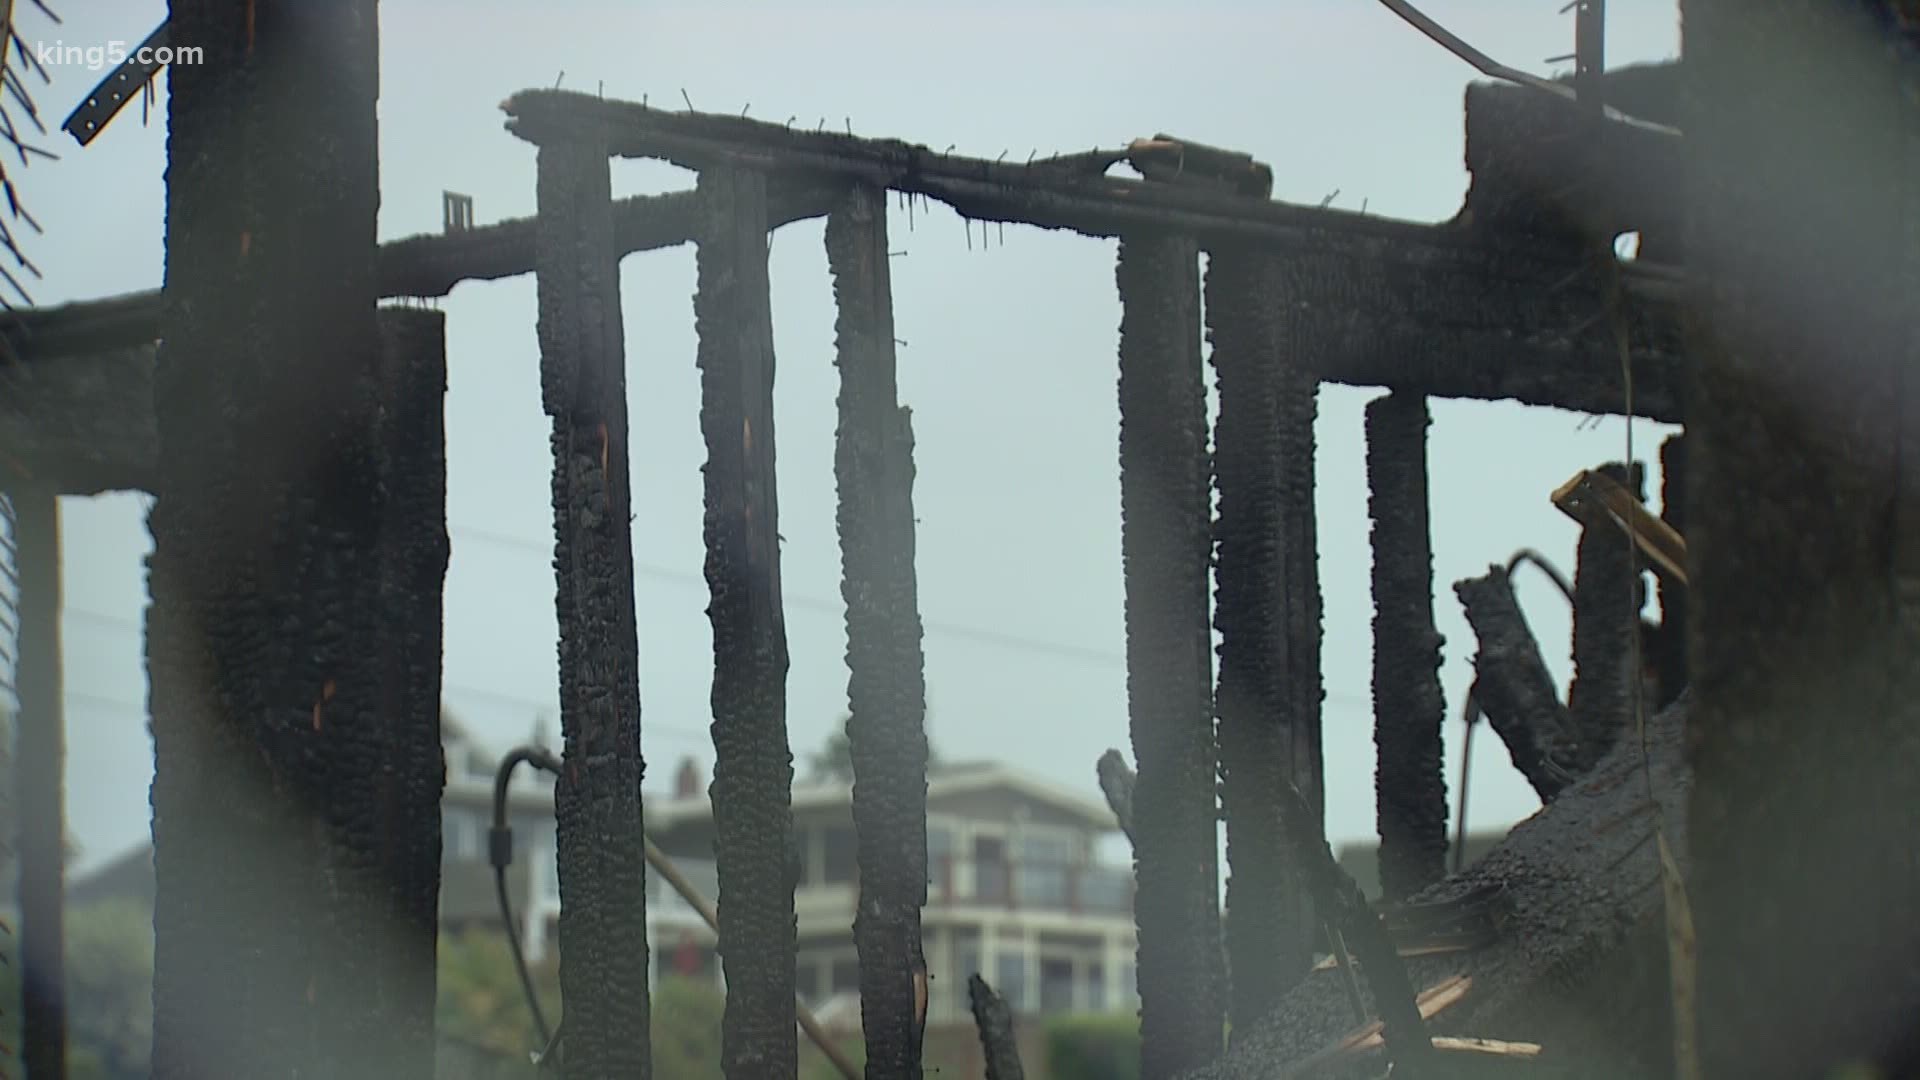 The fire burned down a 266-unit apartment complex that was under construction and due to be the first housing development on the waterfront in Everett’s history.